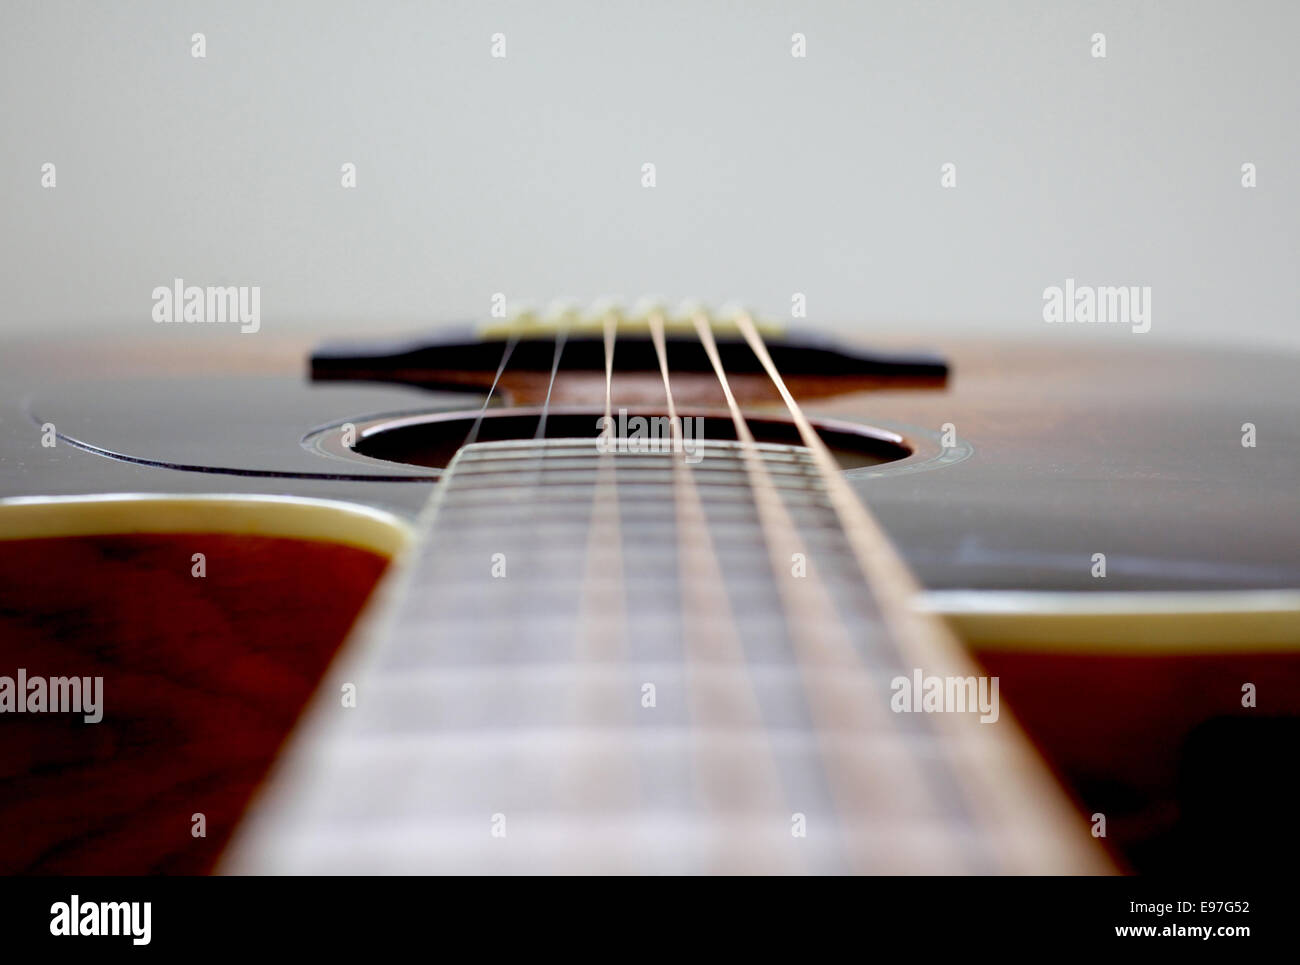 Guitar positioned horizontal to have space at top of image to design on it Stock Photo